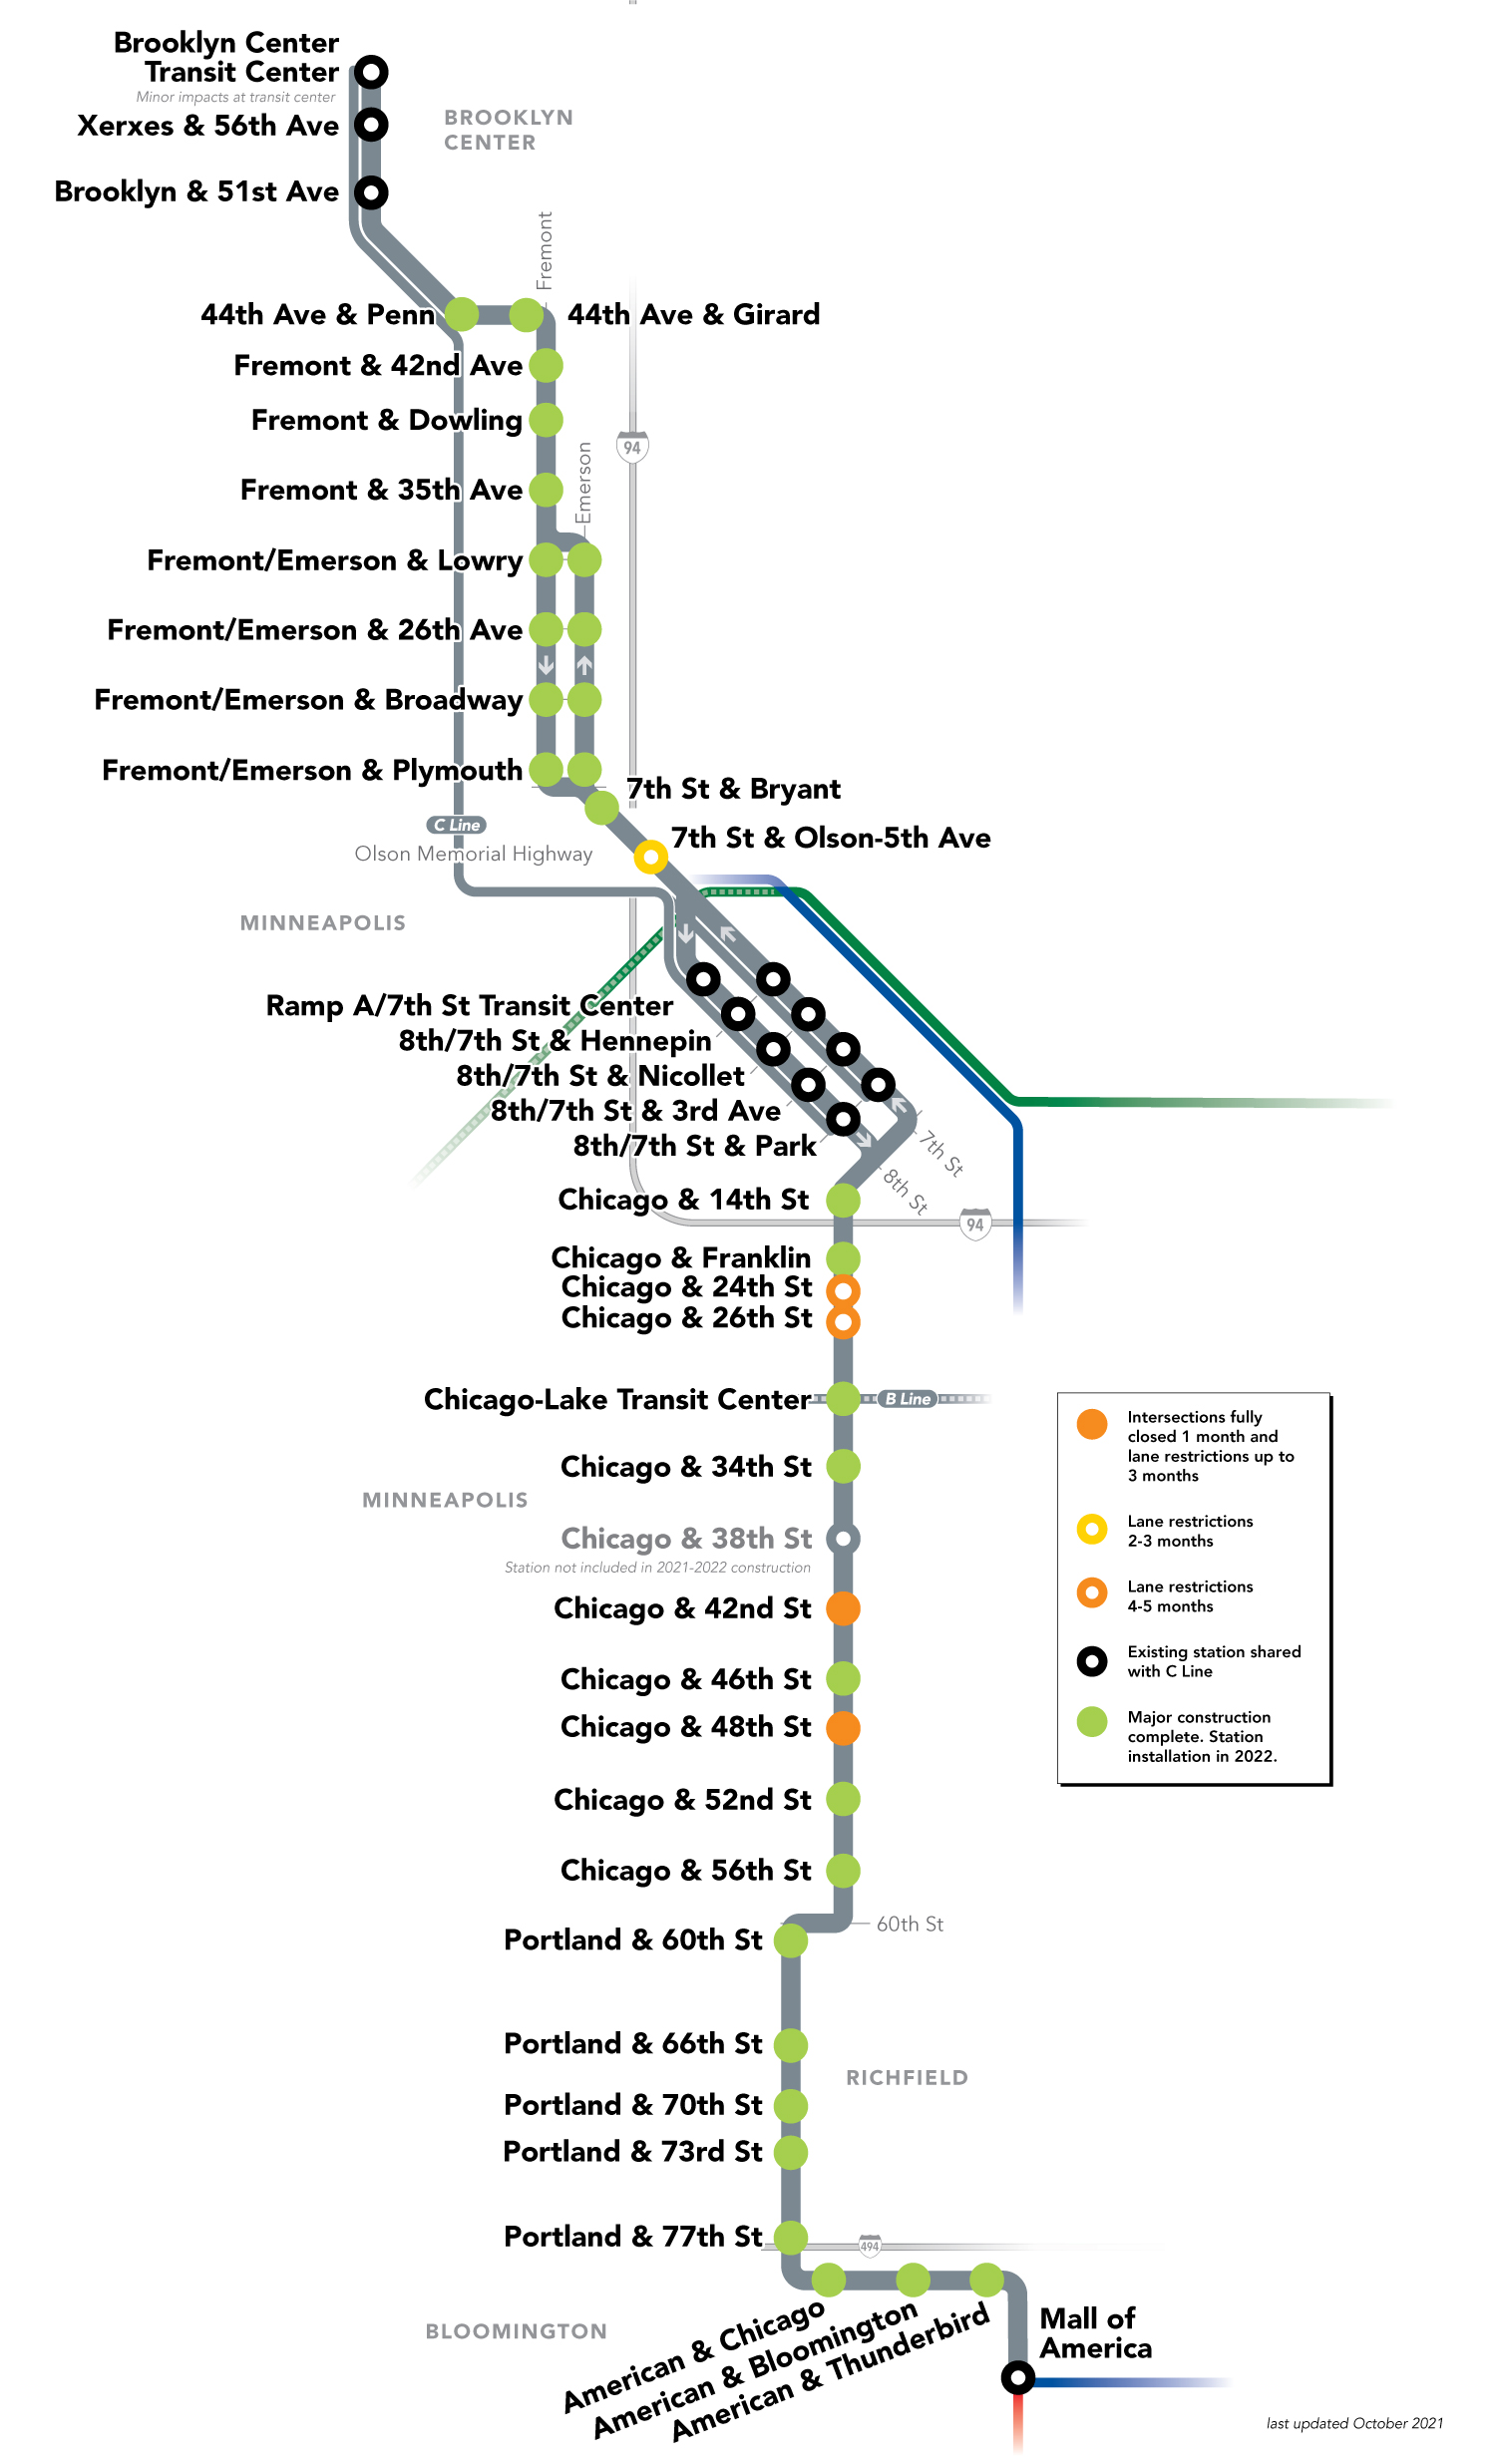 D Line alignment map showing final stations on a line from Brooklyn Center to Mall of America